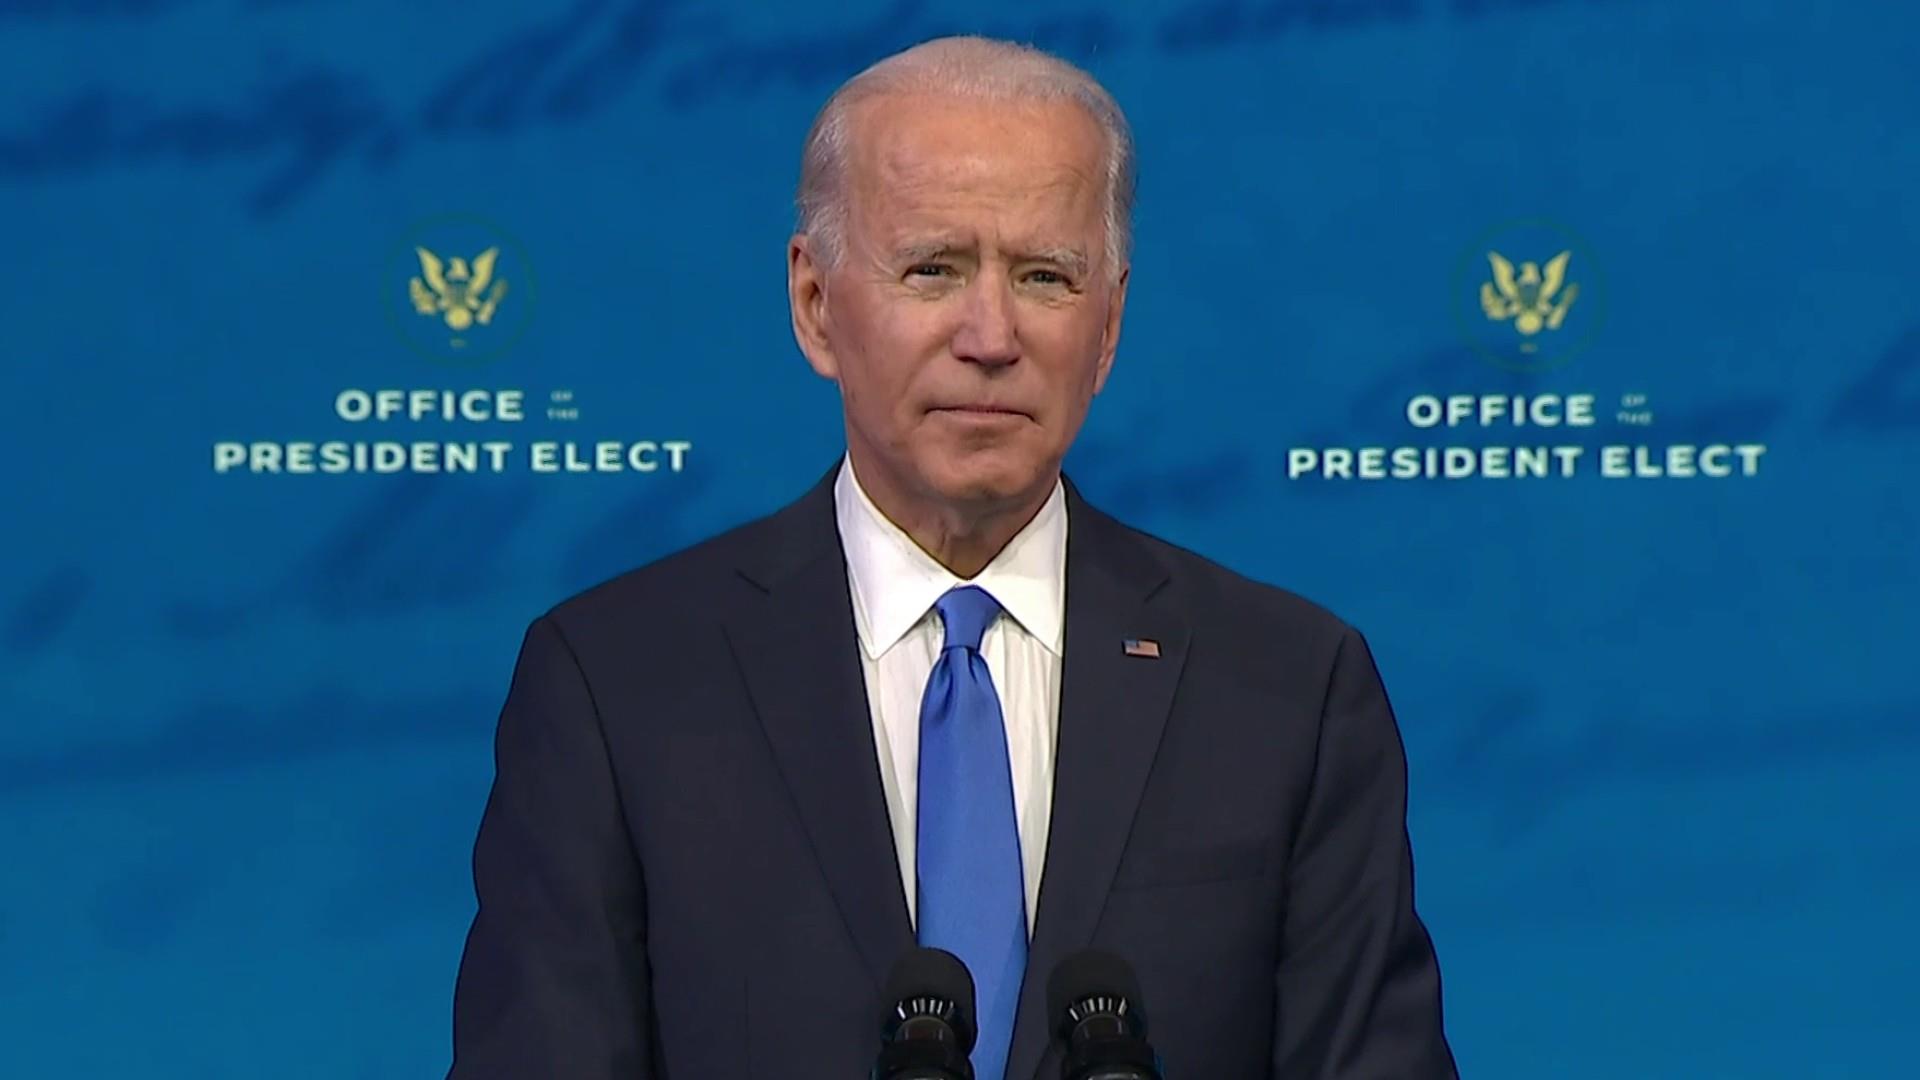 After Electoral College cements win, Biden unleashes scathing attack on Trump’s refusal to concede